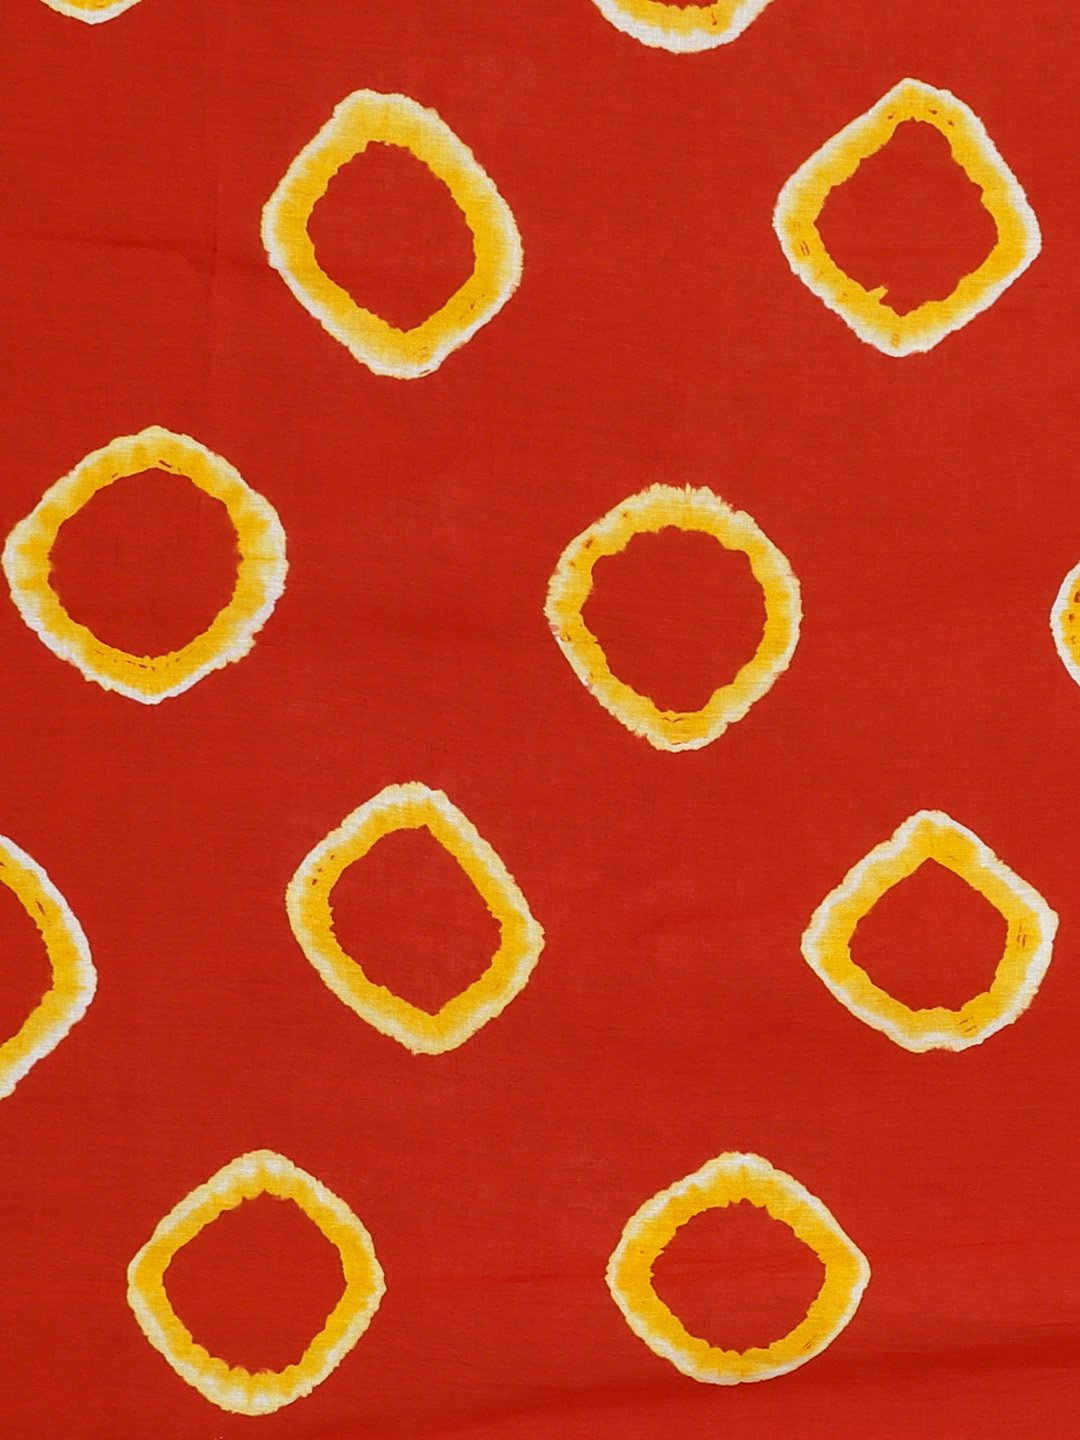 Red & Beige Tie & Dyed Handcrafted Cotton Saree-Saree-Kalakari India-BHKPSA0037-Cotton, Dabu, Geographical Indication, Hand Blocks, Hand Crafted, Heritage Prints, Indigo, Natural Dyes, Sarees, Sustainable Fabrics-[Linen,Ethnic,wear,Fashionista,Handloom,Handicraft,Indigo,blockprint,block,print,Cotton,Chanderi,Blue, latest,classy,party,bollywood,trendy,summer,style,traditional,formal,elegant,unique,style,hand,block,print, dabu,booti,gift,present,glamorous,affordable,collectible,Sari,Saree,printed,